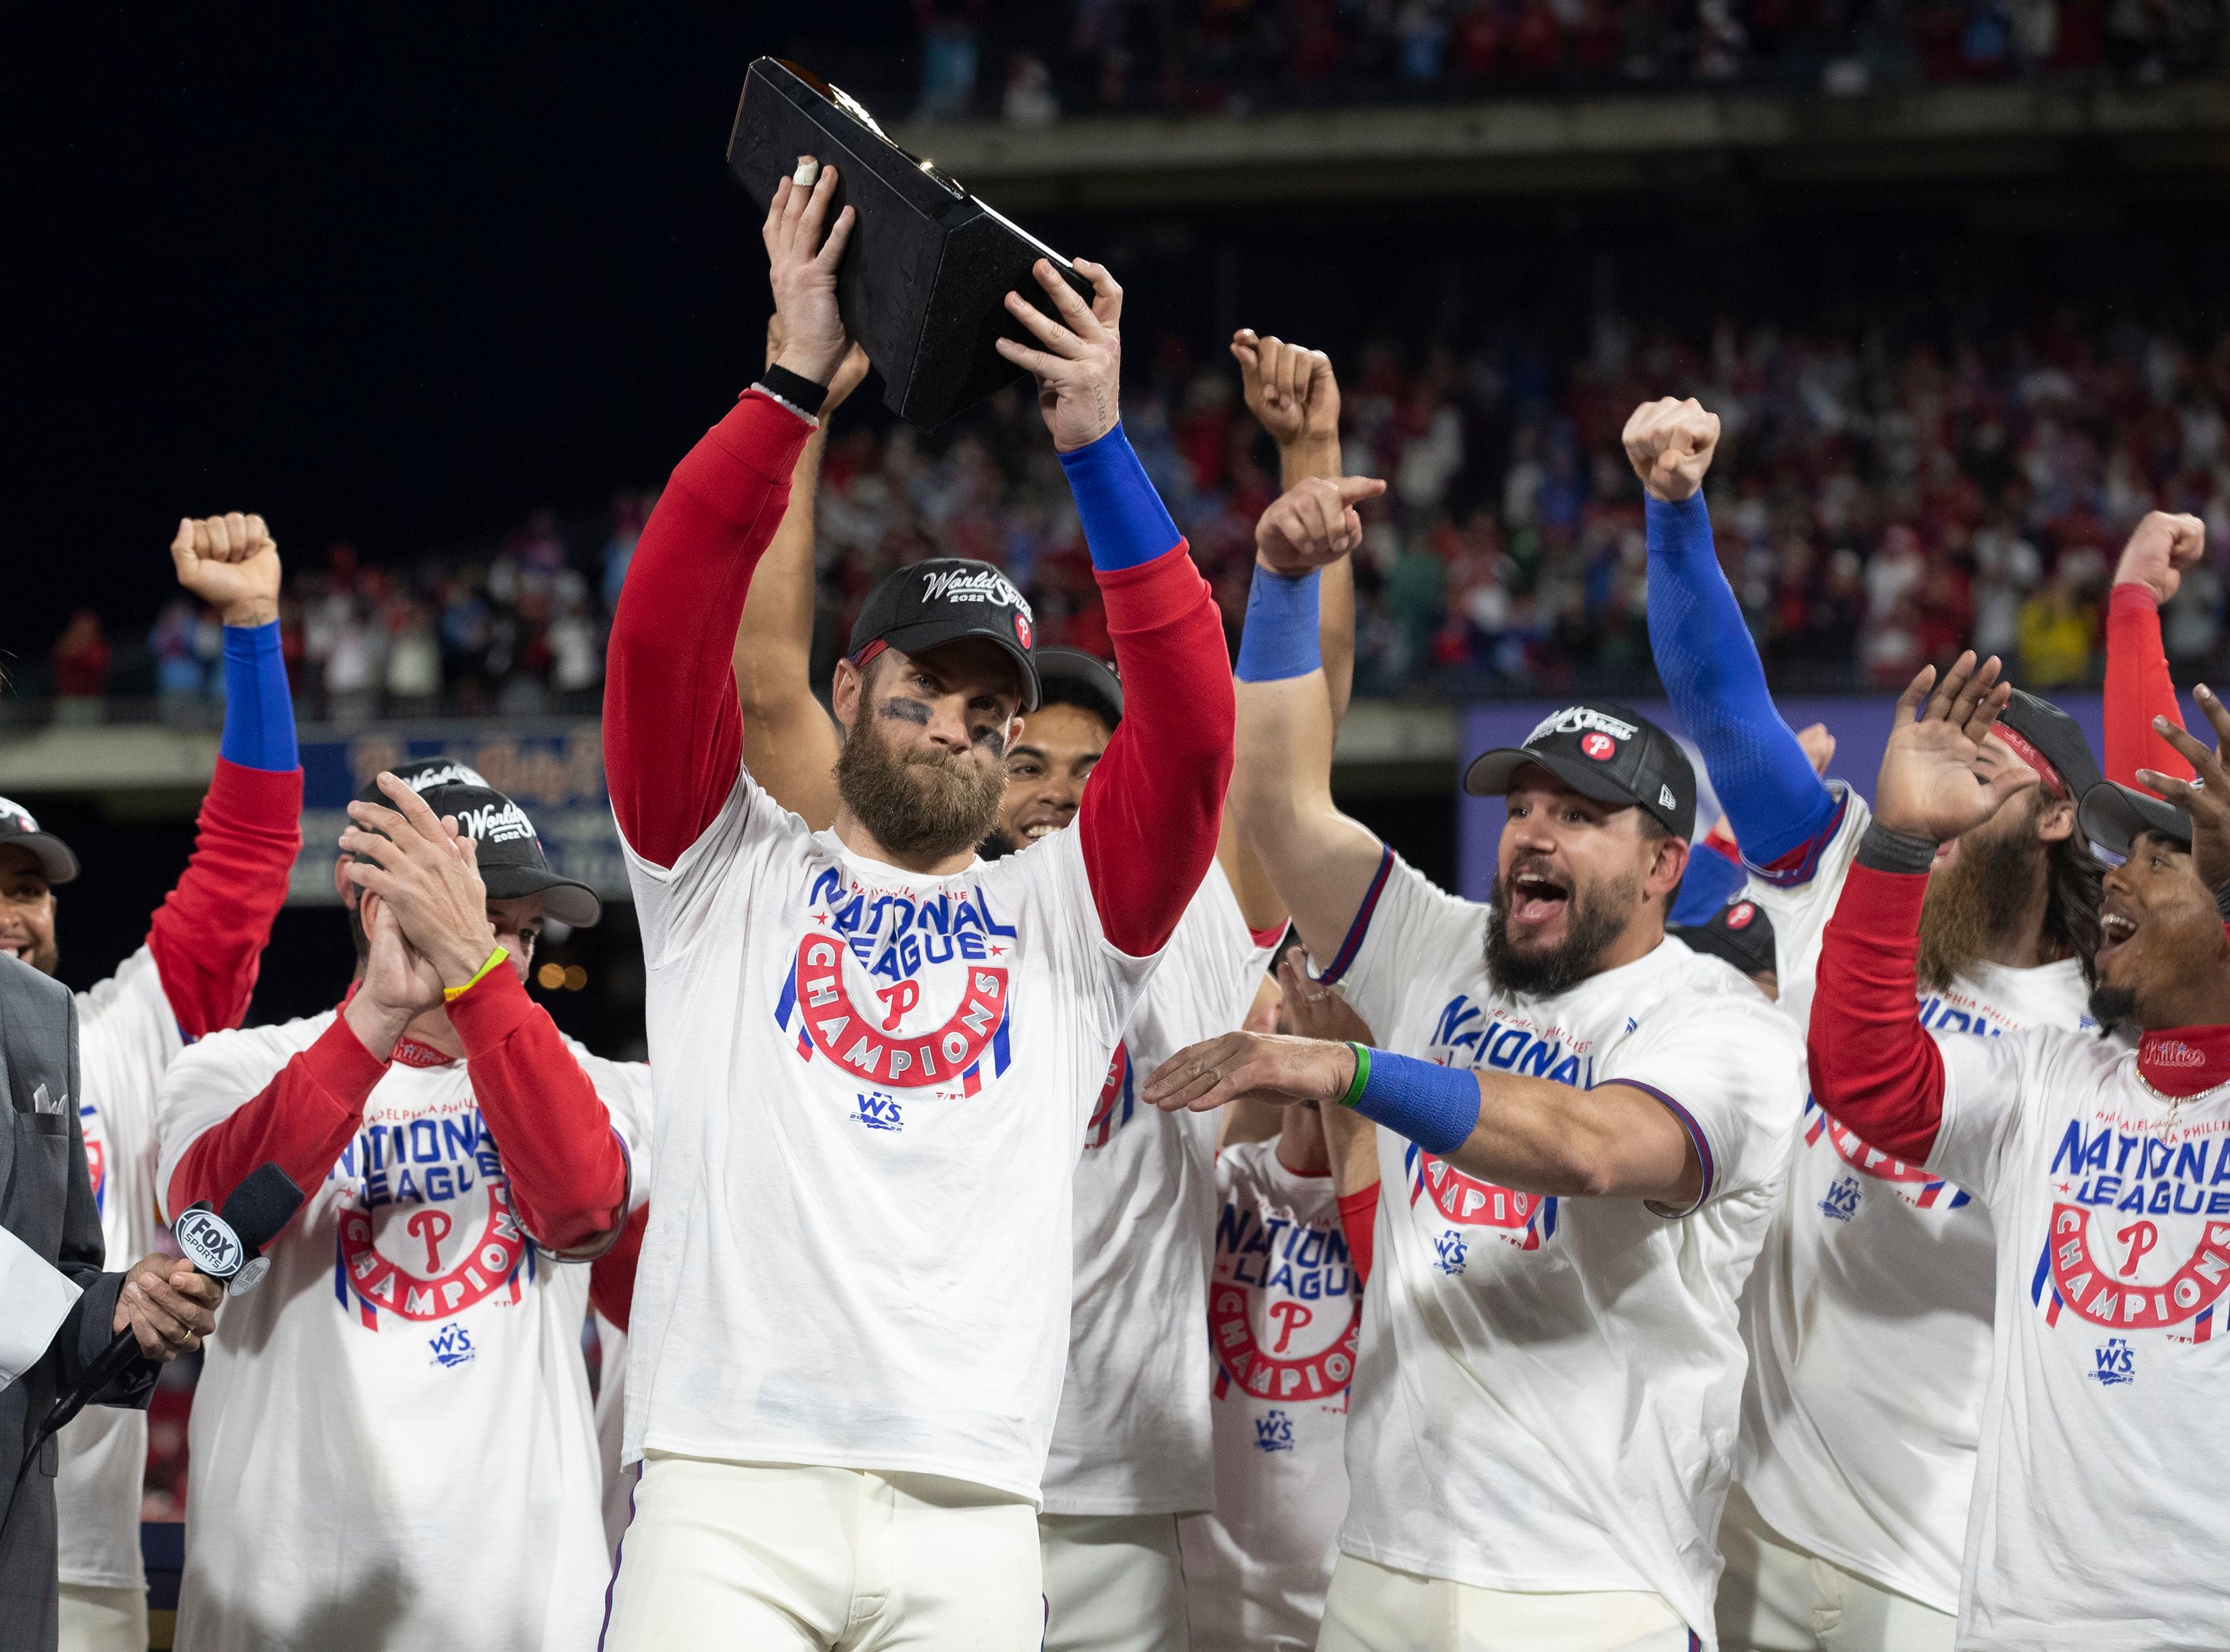 NLCS MVP Bryce Harper predicts World Series victory: 'We're gonna bring  this s--t home